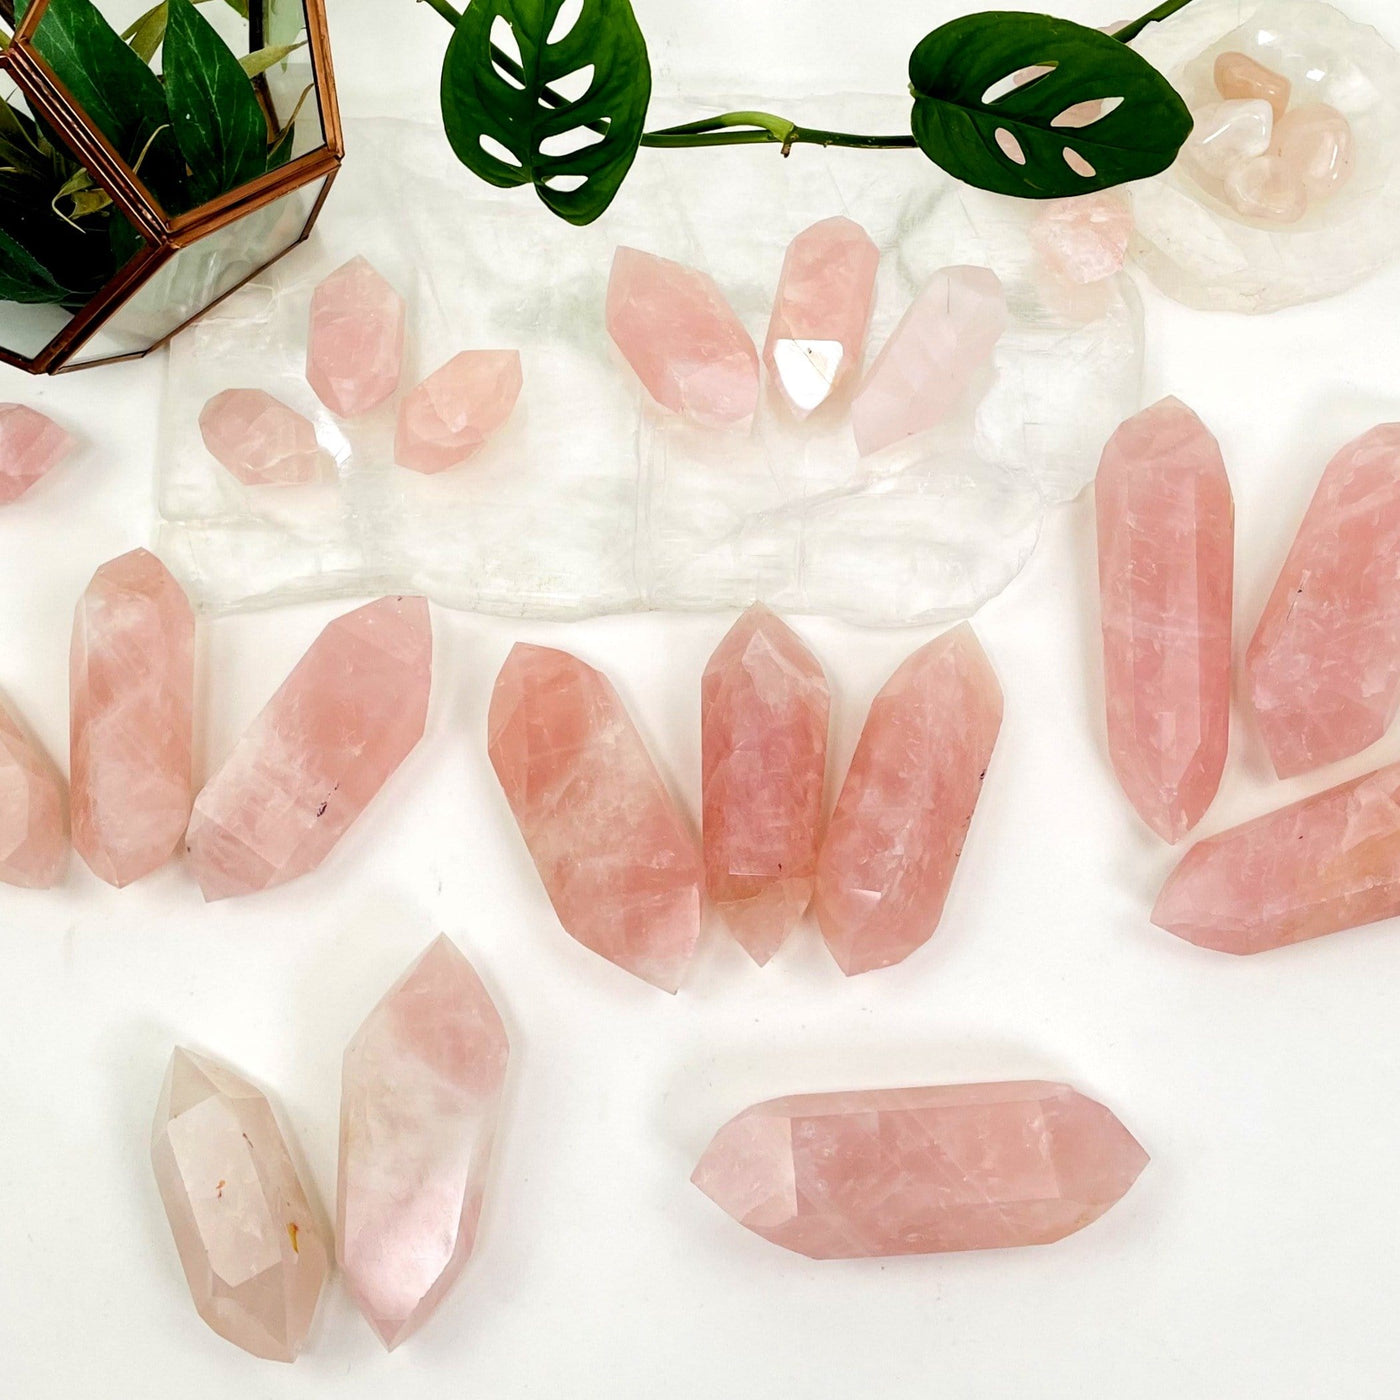 Rose Quartz Double Terminated Points arranged in trios with other crystals and plants in the background